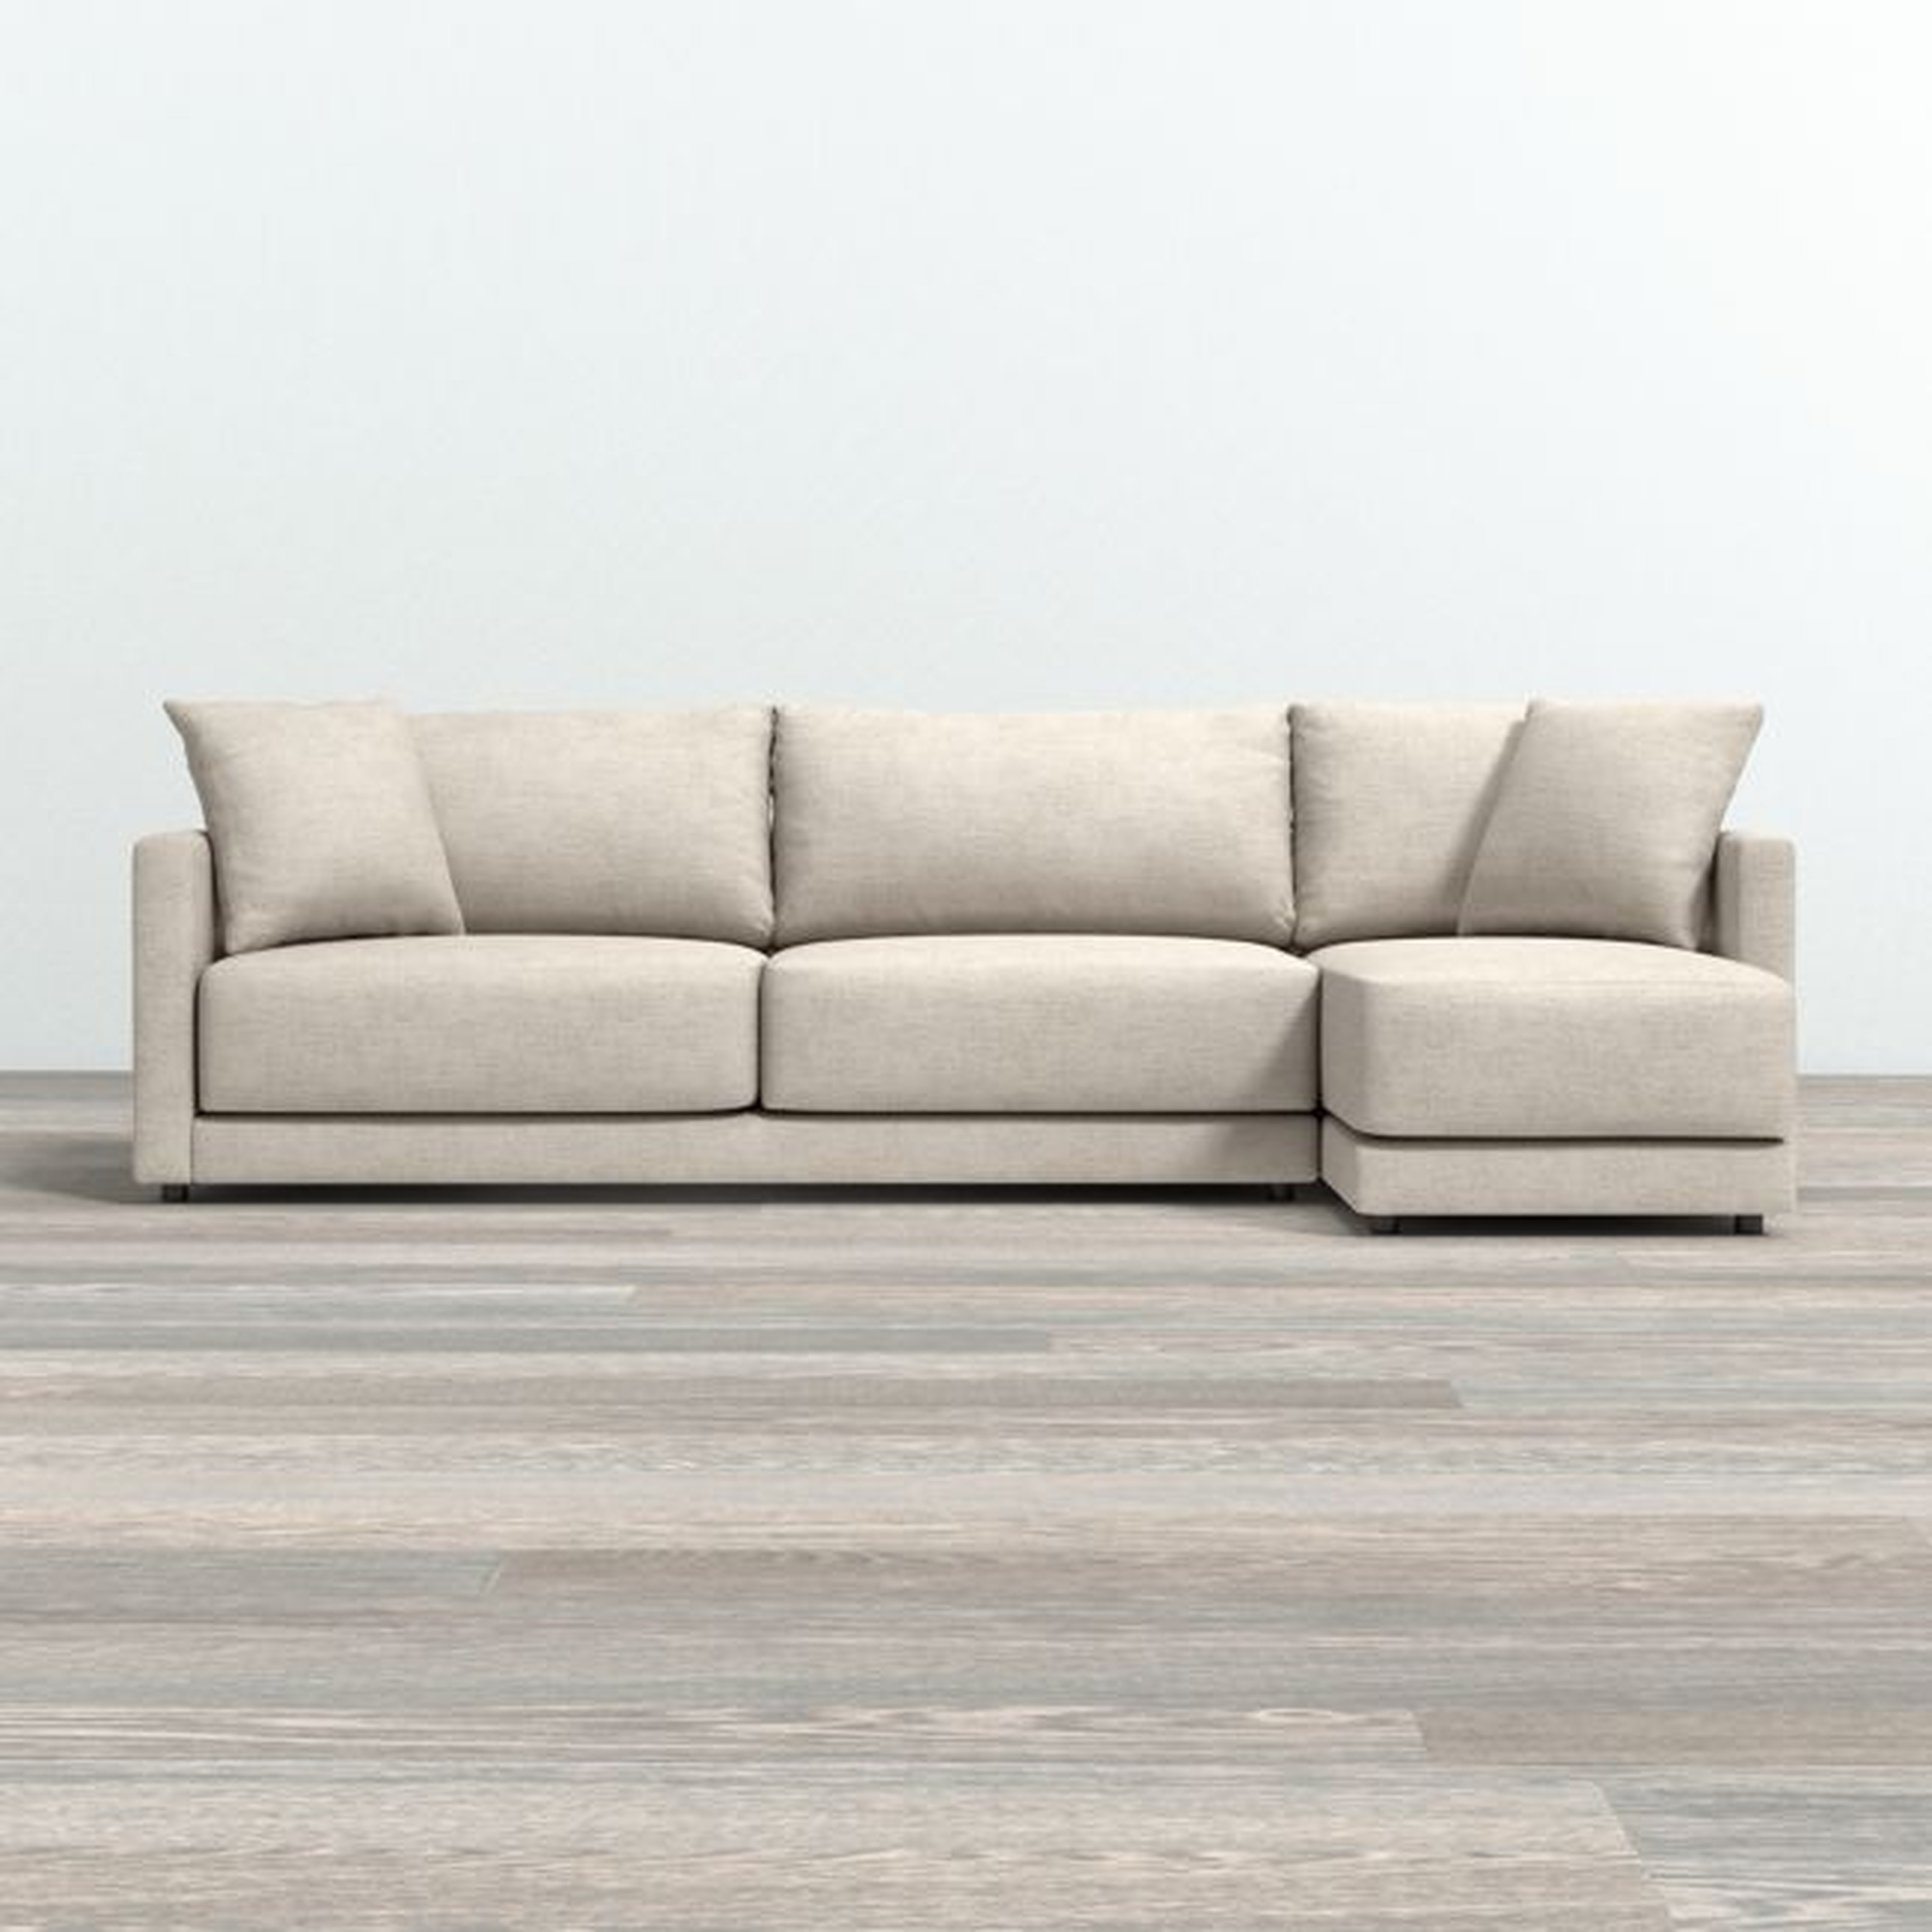 Gather 2-Piece Sectional Sofa - Crate and Barrel